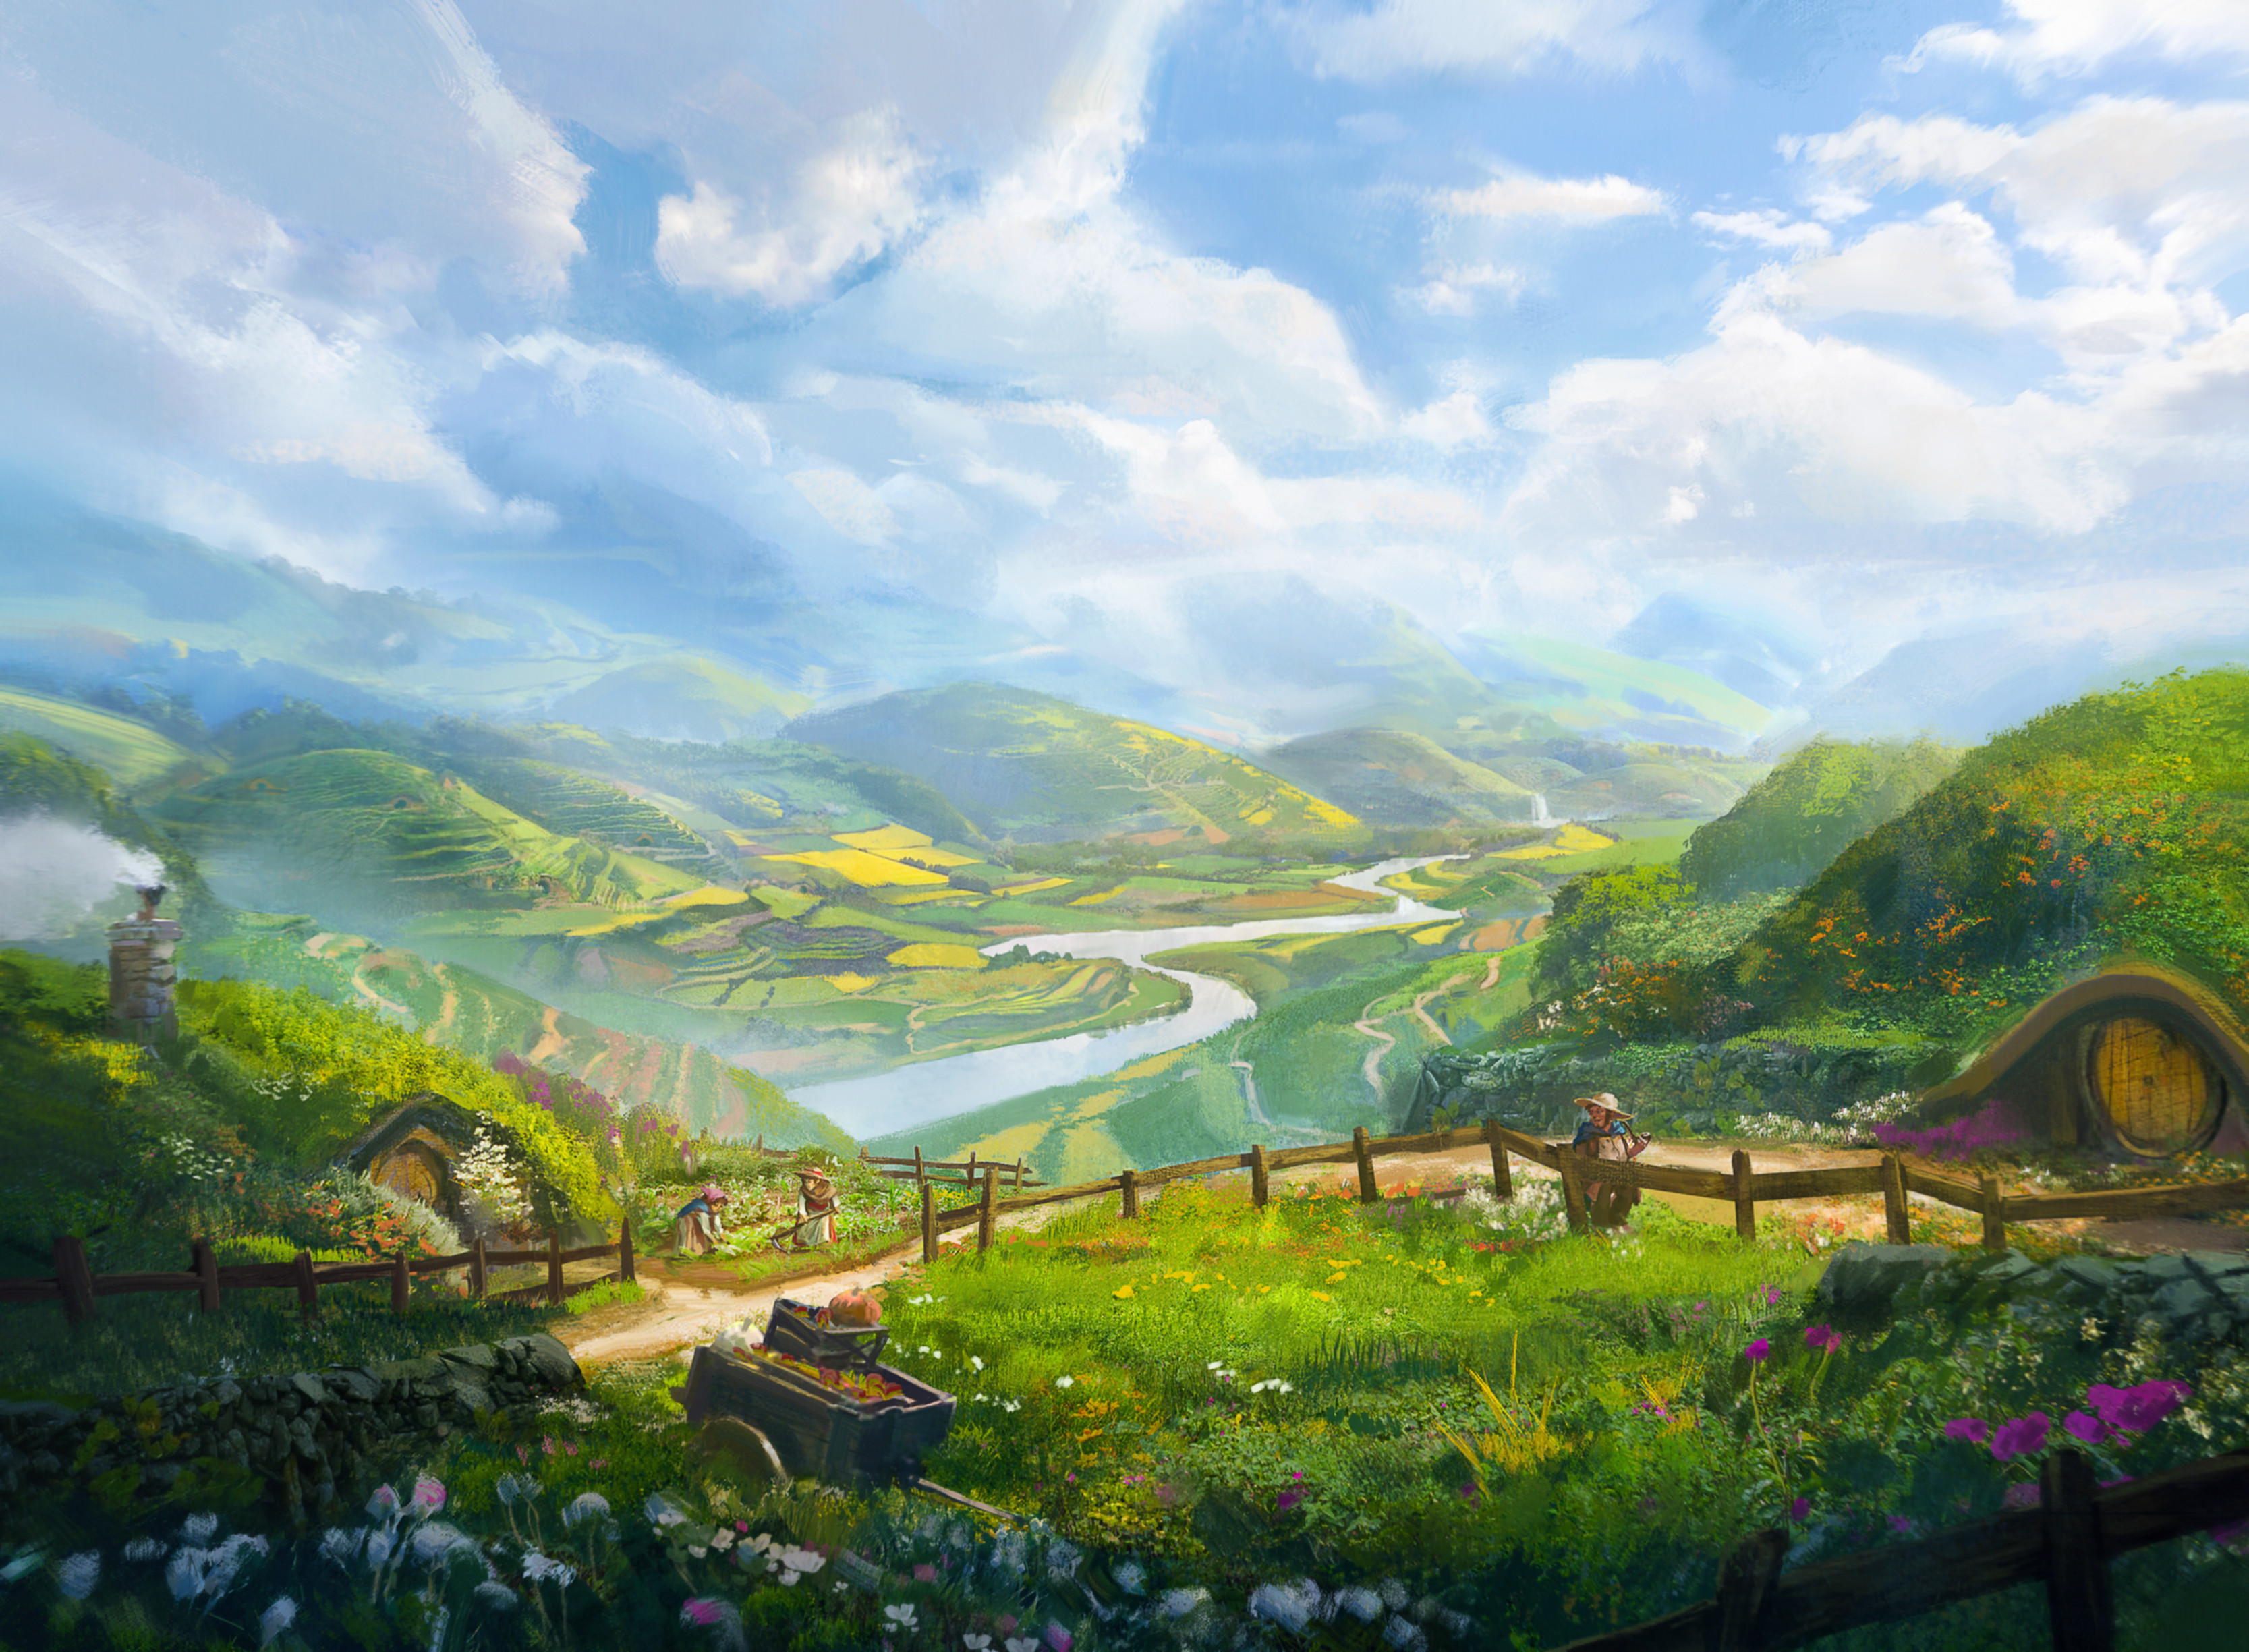 General 3334x2449 artwork digital art river nature mountains The Shire The Lord of the Rings clouds Hobbits sky landscape flowers path Hobbiton hills